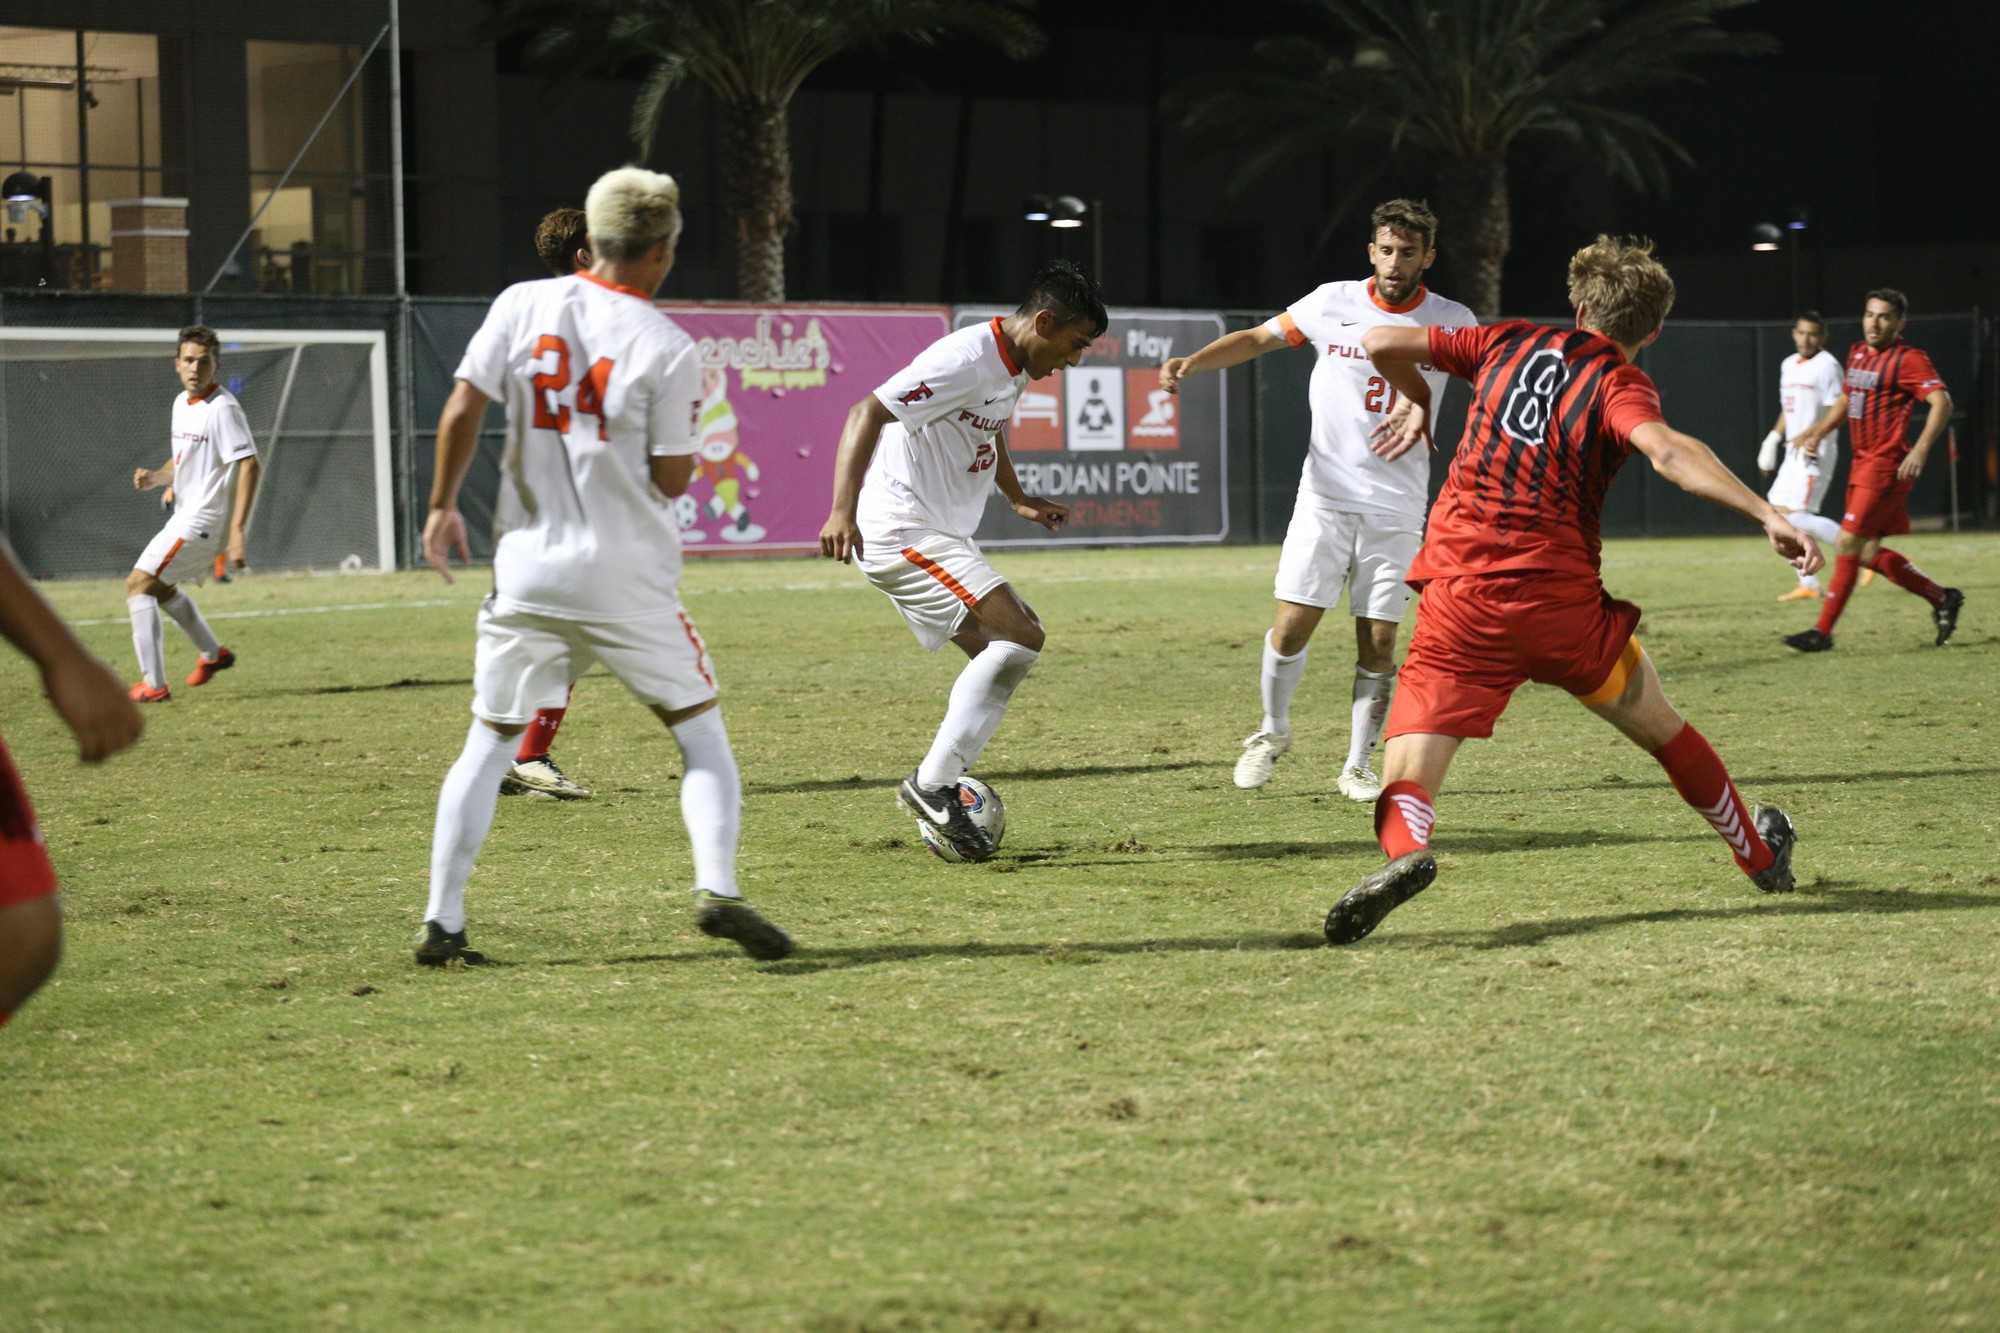 Jules Cailliau goes up against three Cal State Fullerton players in attempts to steal the ball and take it towards their goal on Oct. 12. Photo credit: Max Zeronian